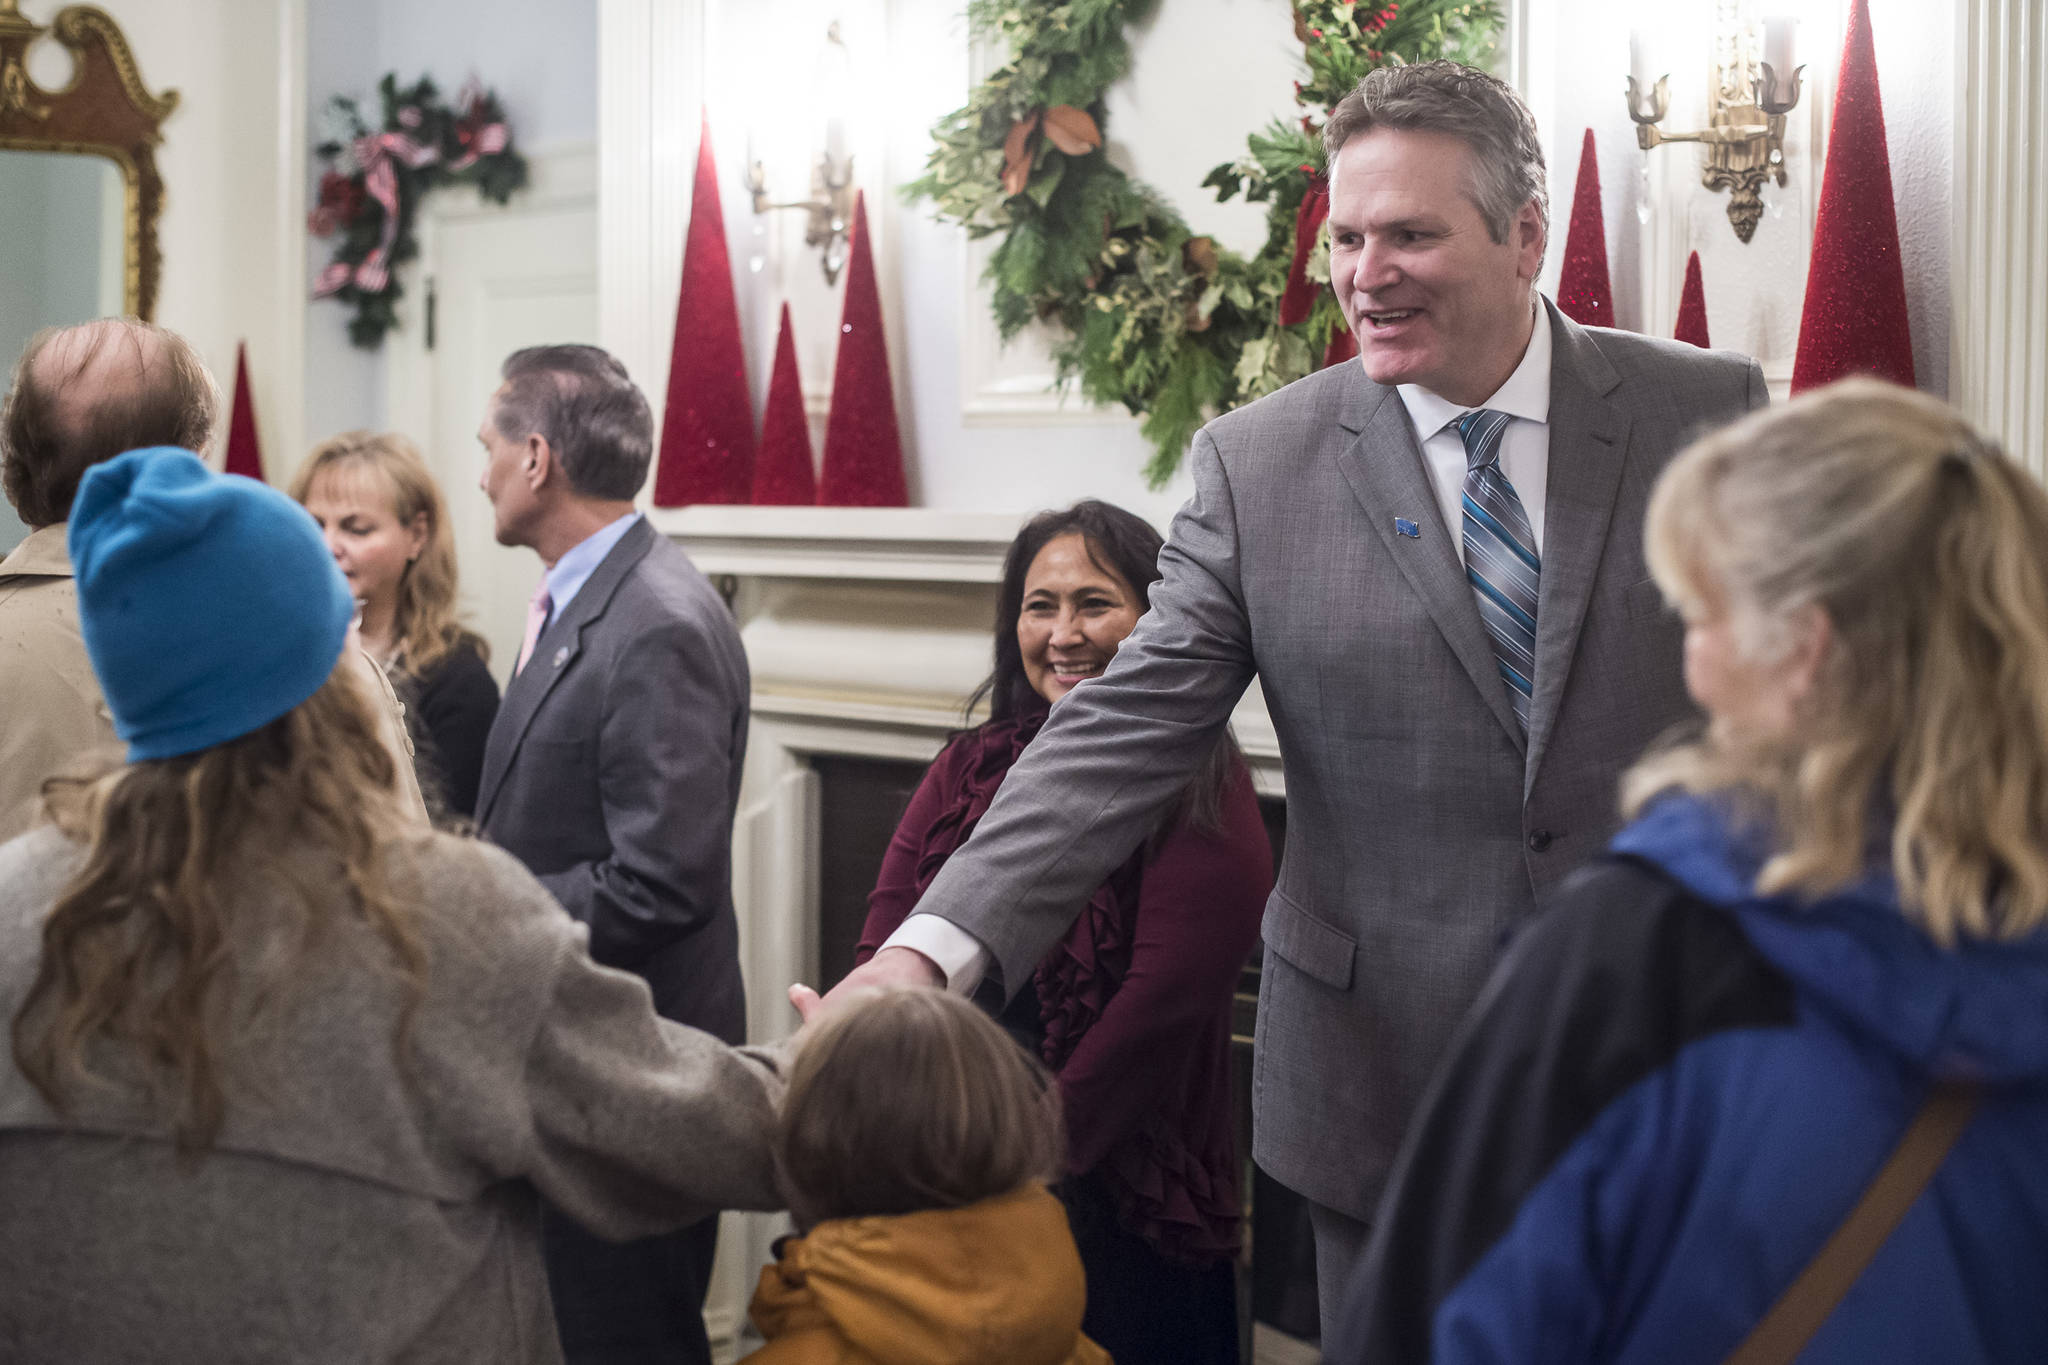 Gov. Mike Dunleavy and his wife, Rose, welcome Juneau residents at the Governor’s Open House on Tuesday. (Michael Penn | Juneau Empire)